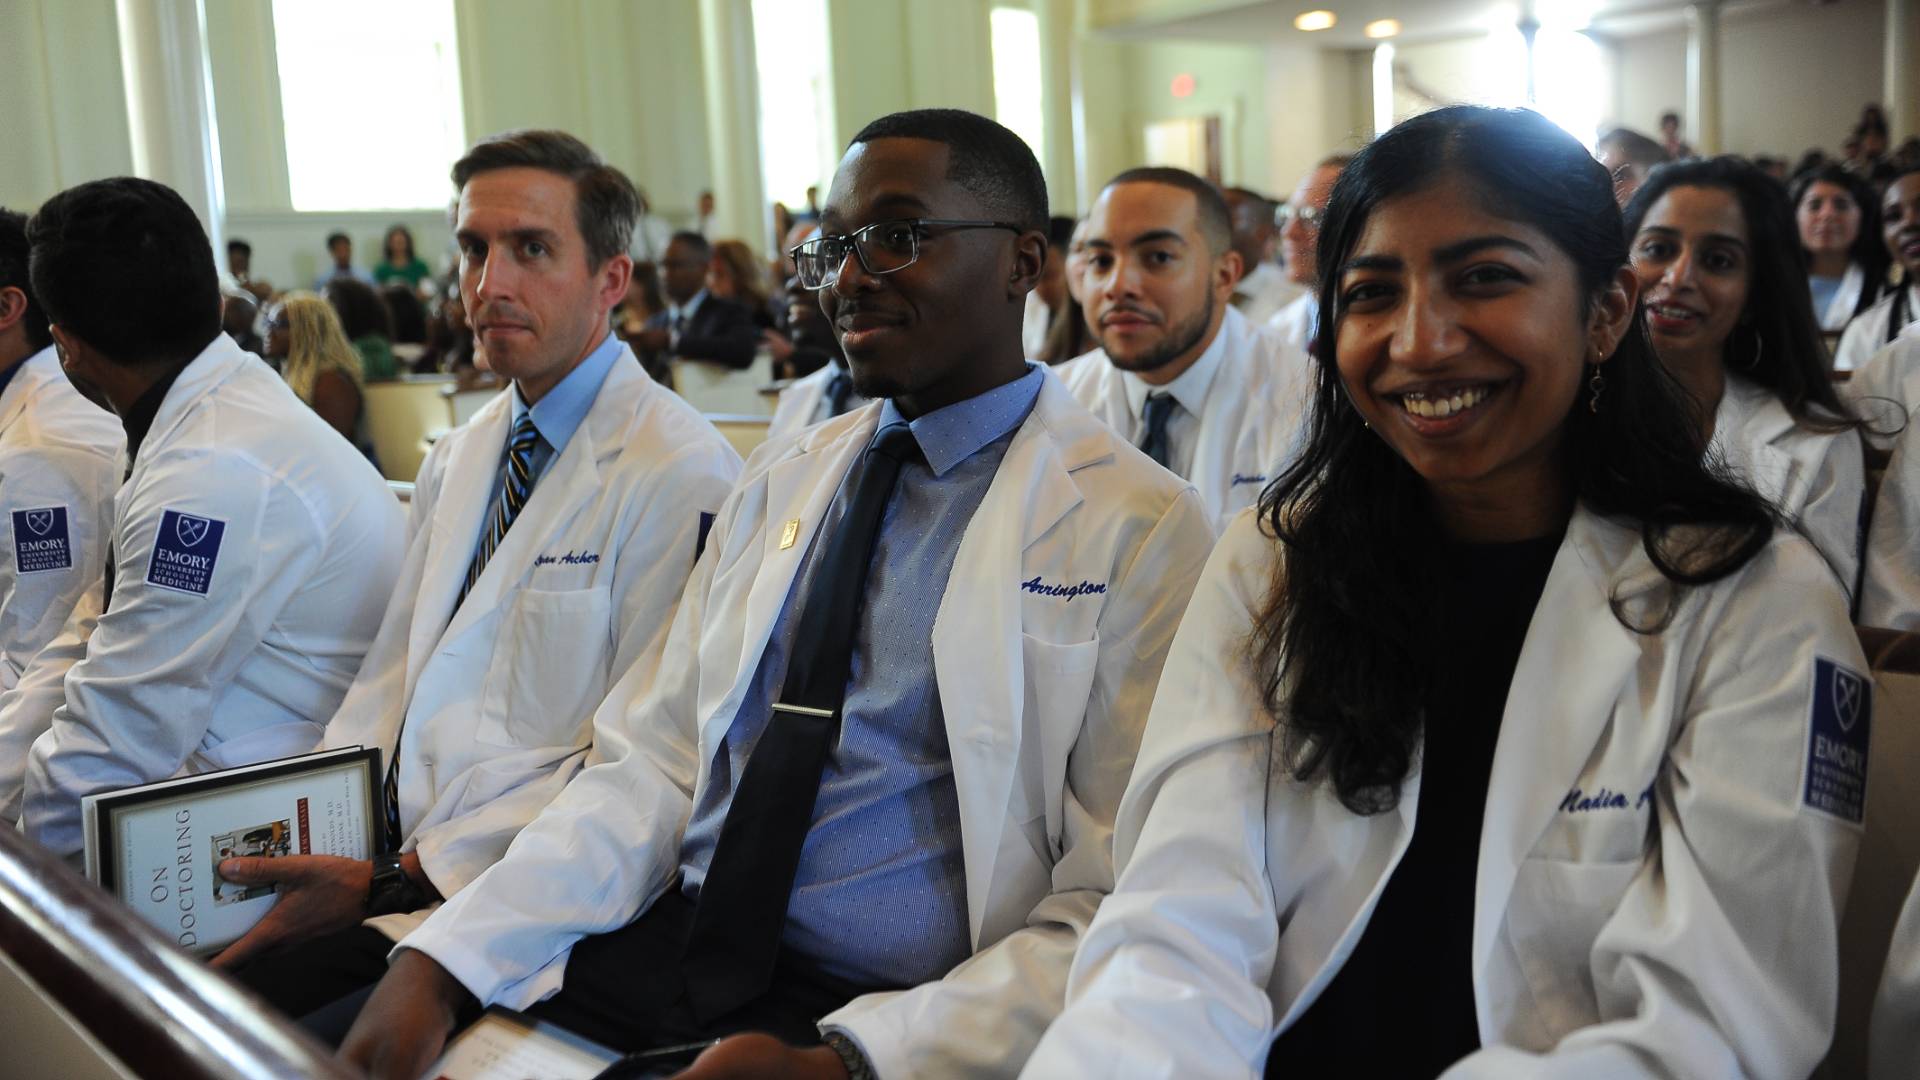 Students seated in white coats